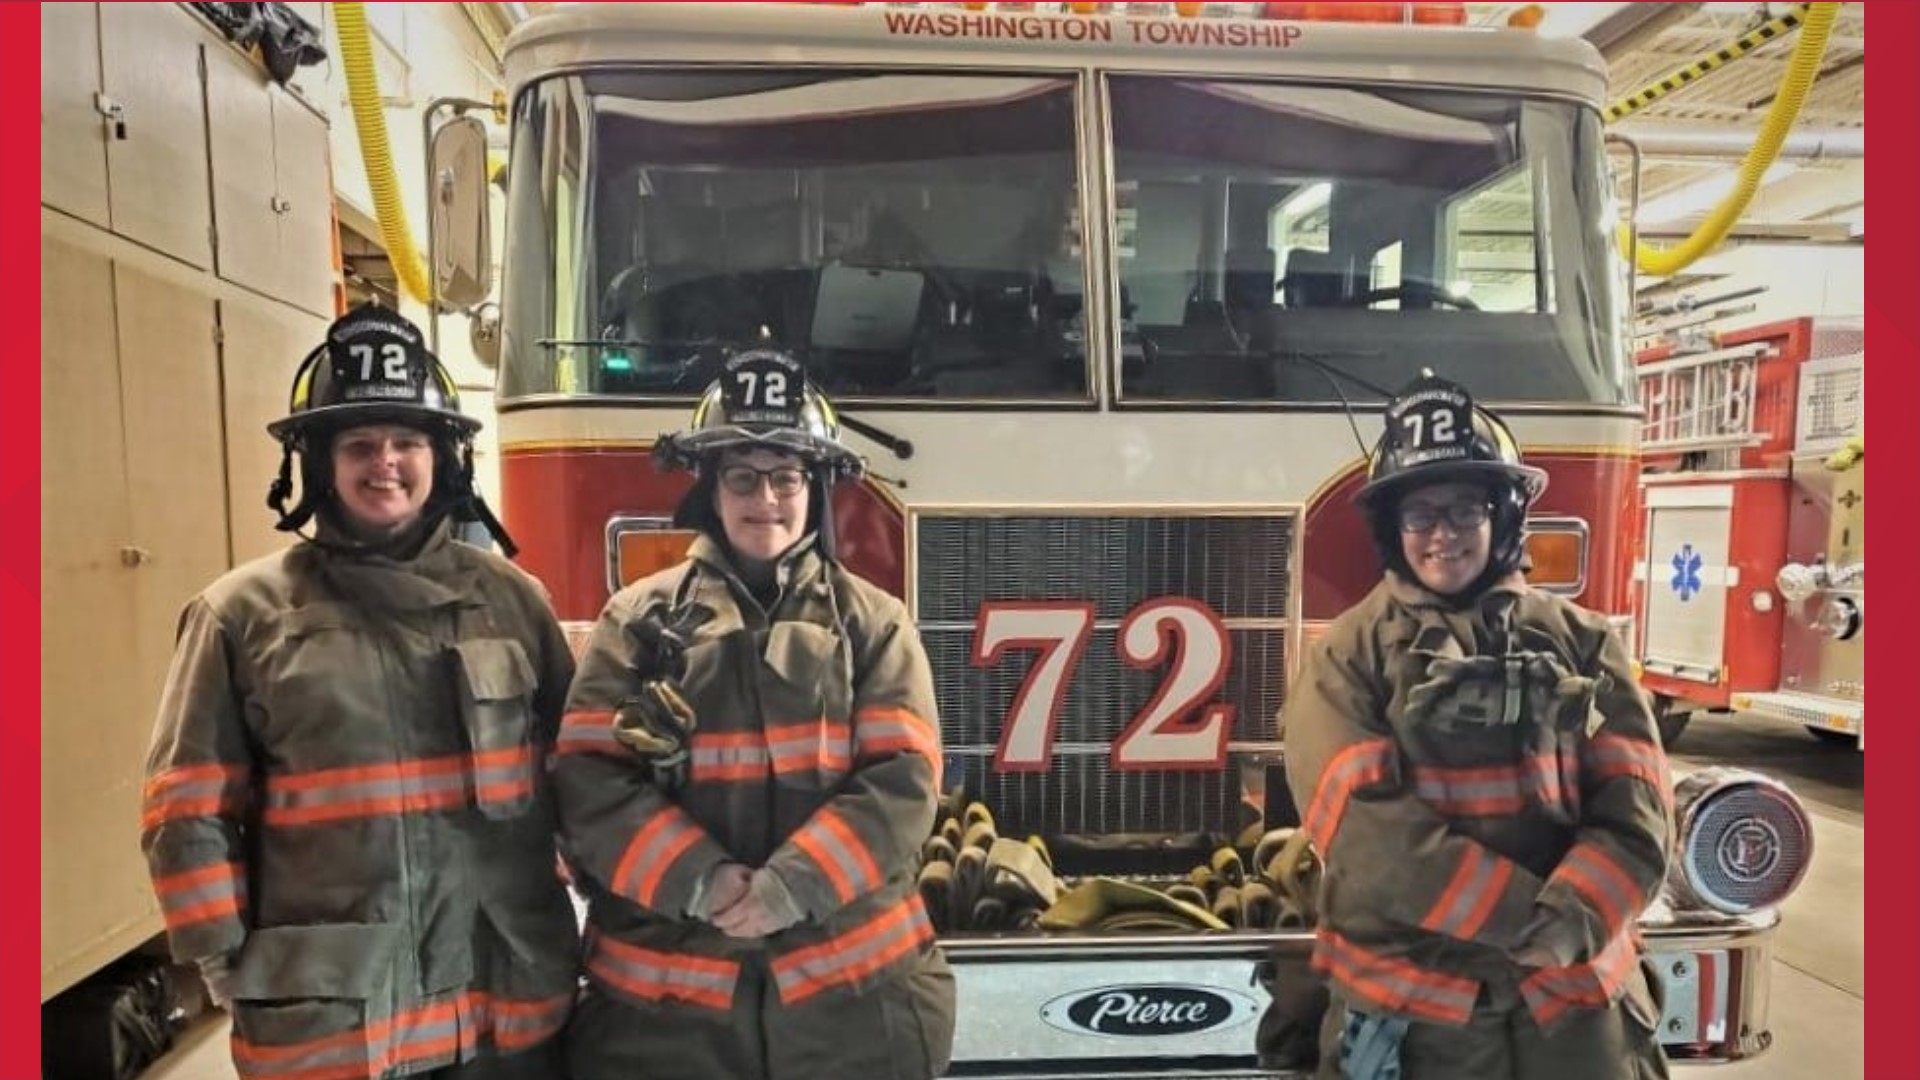 For the first time in Washington Township Fire Department's history, Engine 72 responded with its first ever all-female engine crew to a working fire.